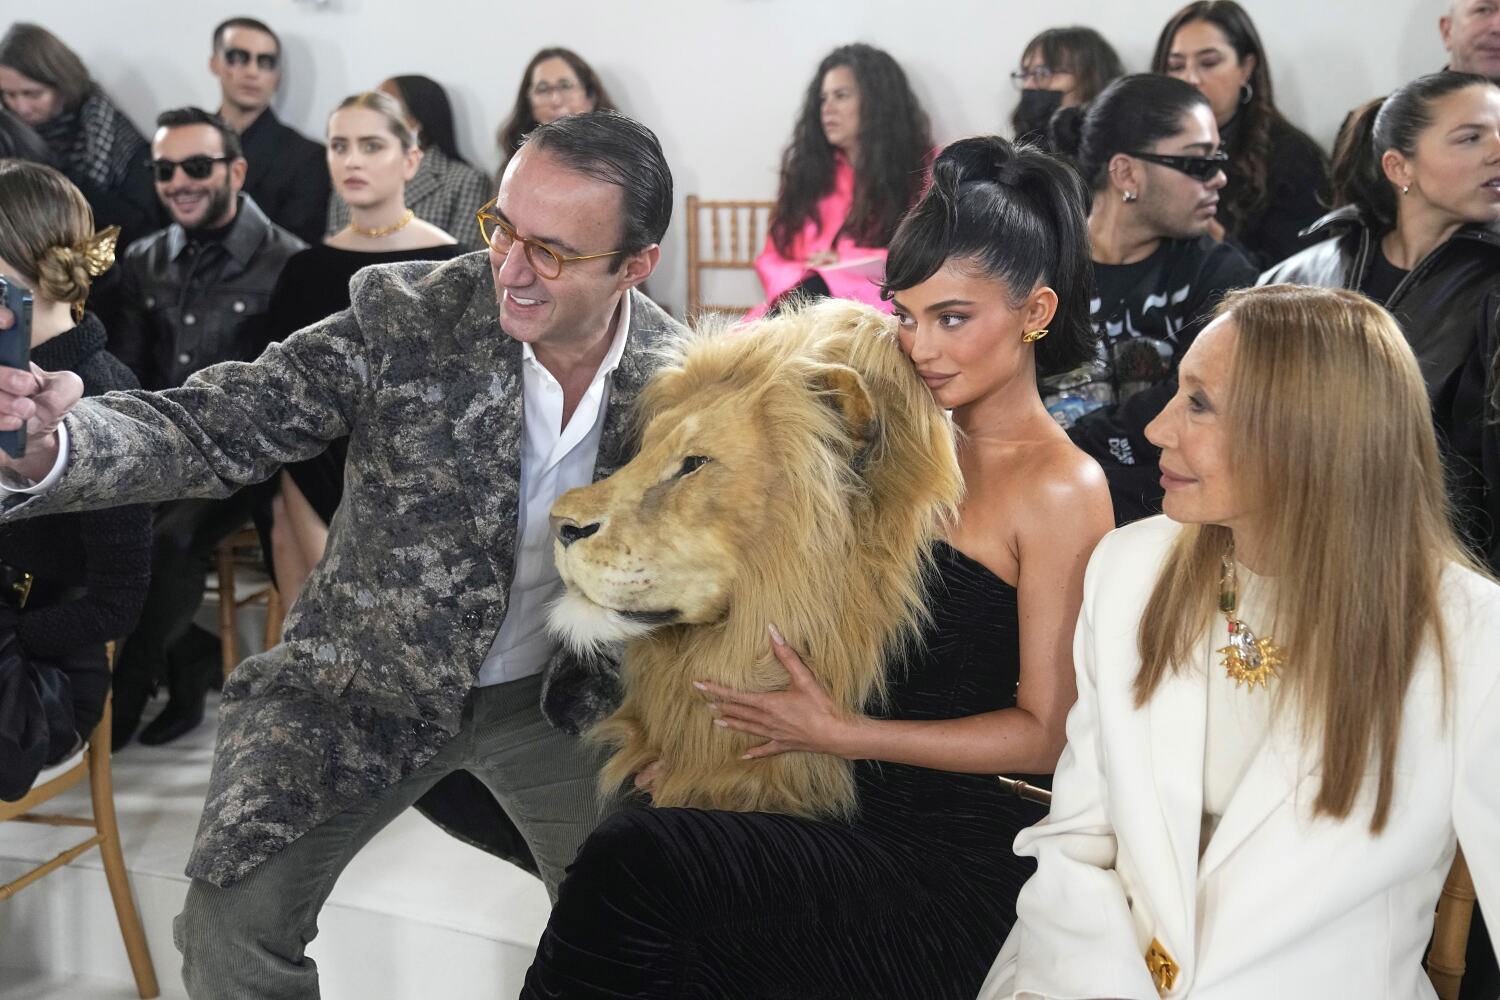 Kylie Jenner just wore a dress decorated with a lion's head. Why is PETA so happy?